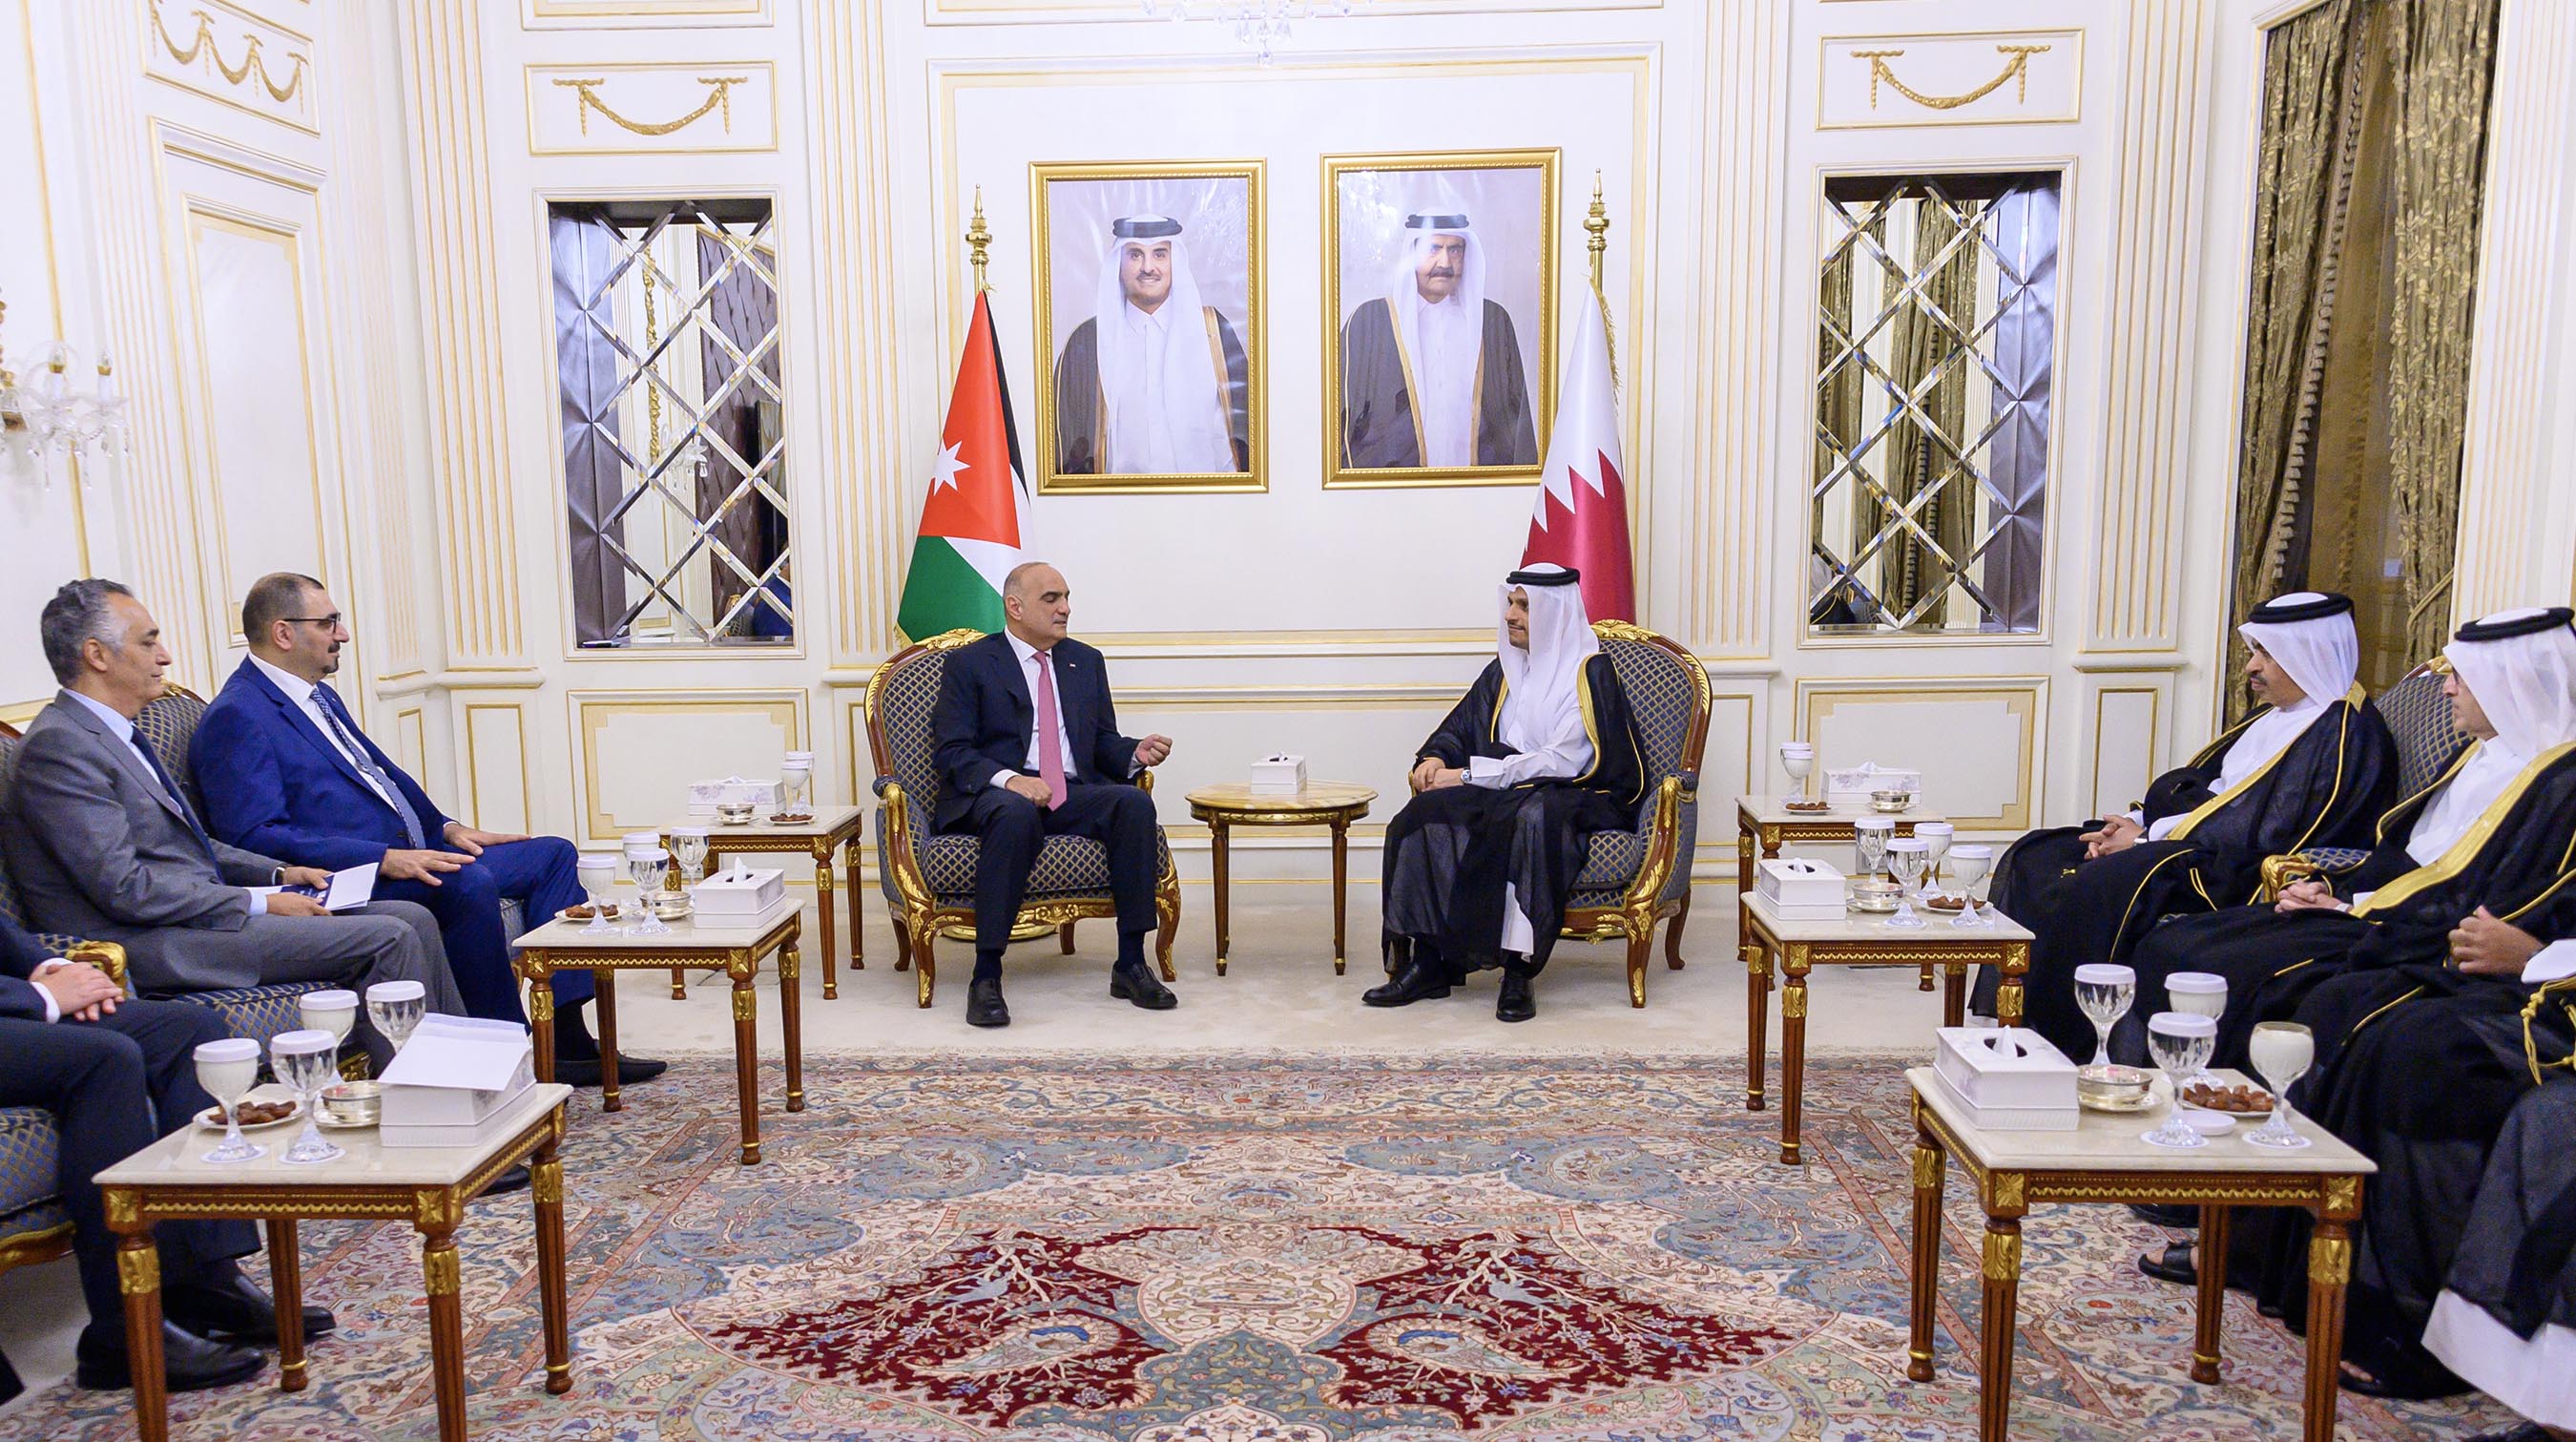 Prime Minister and Minister of Foreign Affairs , Jordanian PM Hold Official Talks Session, Bilateral Meeting